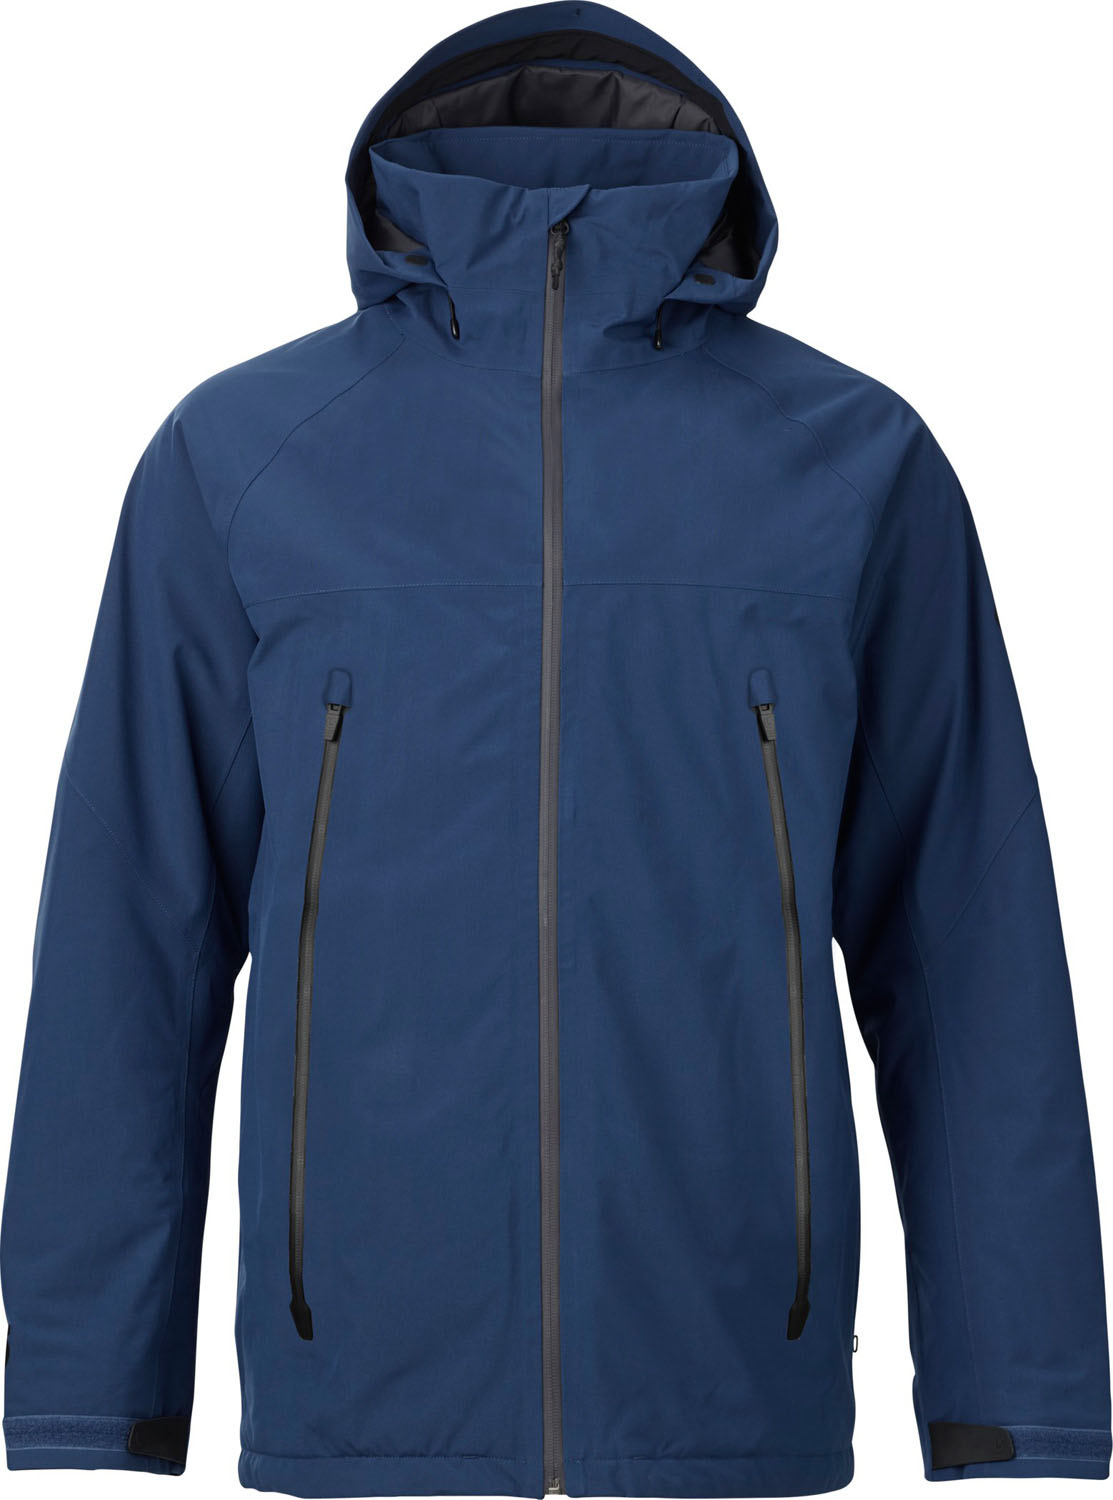 Burton Ether Jacket Review - The Good Ride